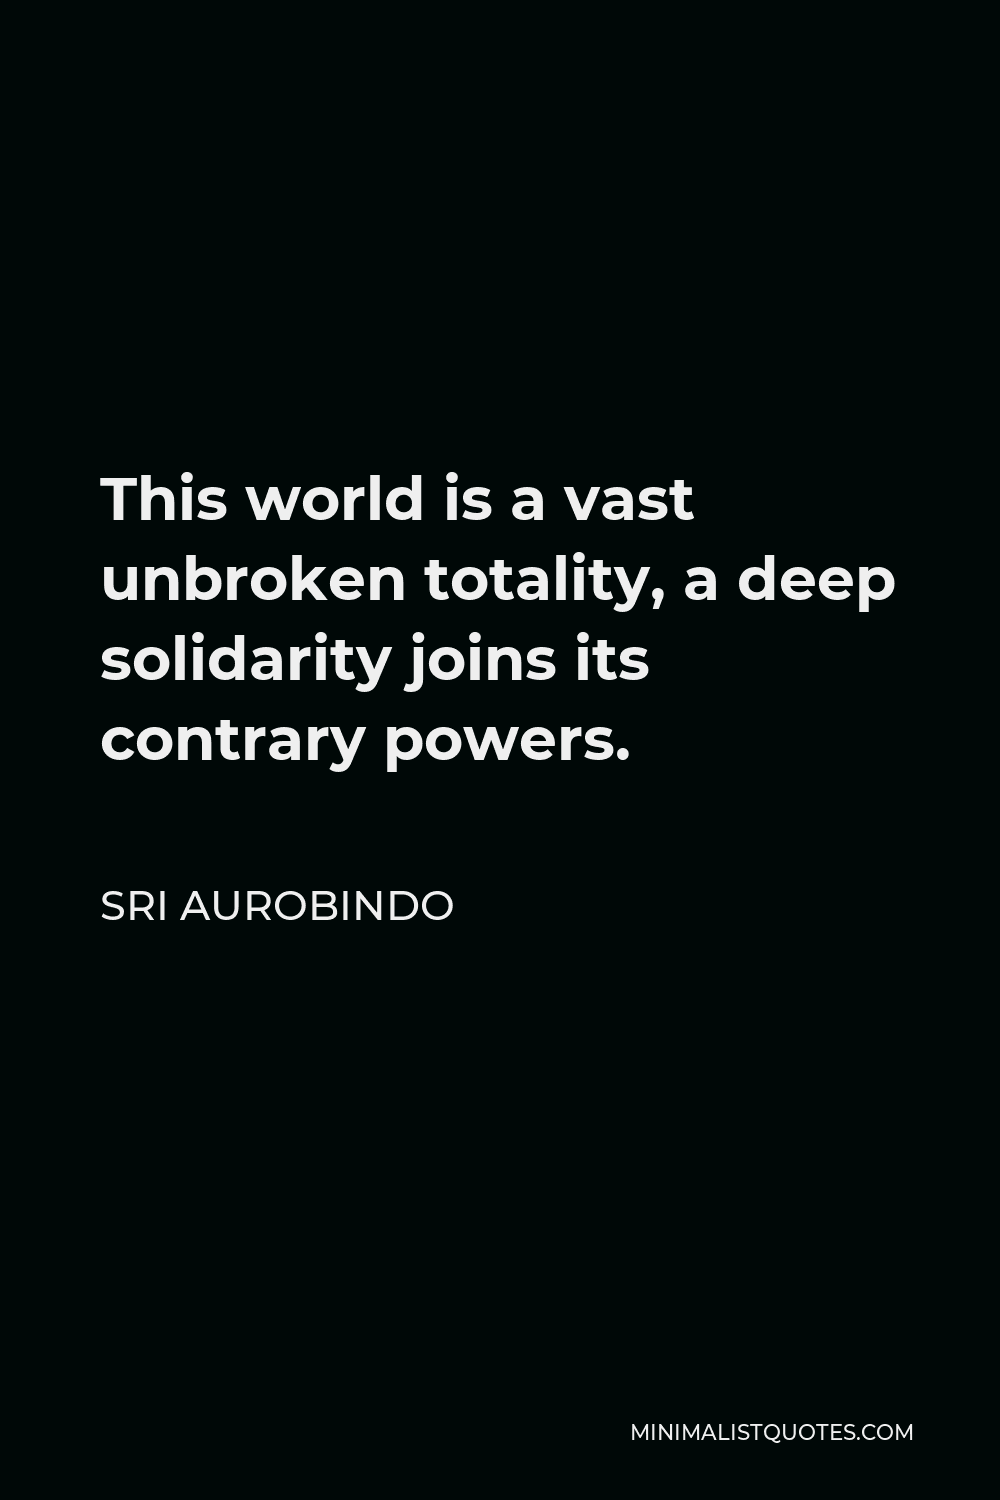 Sri Aurobindo Quote - This world is a vast unbroken totality, a deep solidarity joins its contrary powers.